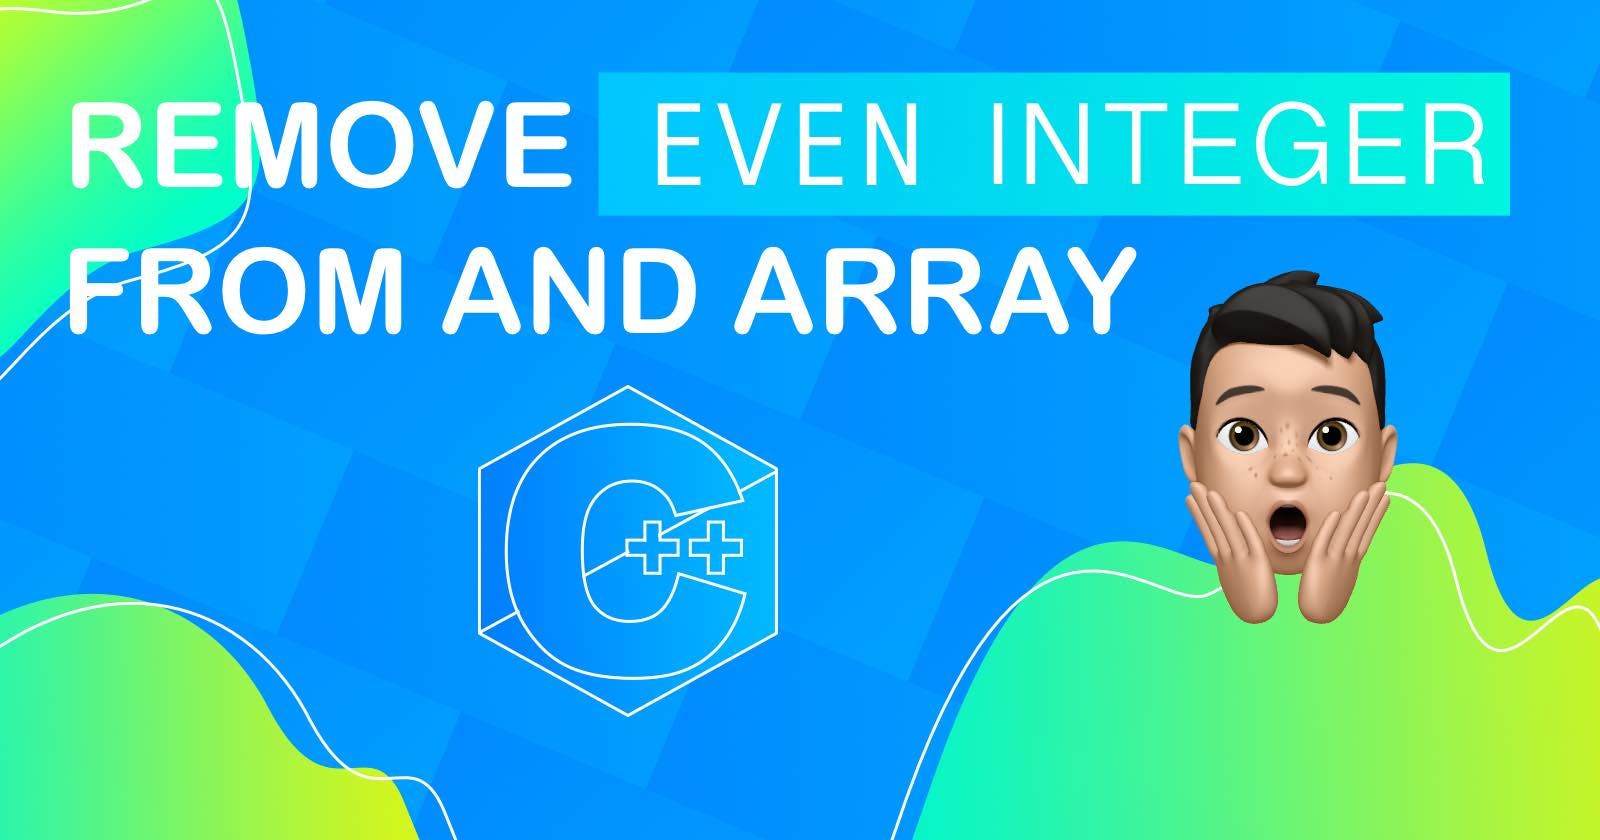 Remove Even Integers From an Array